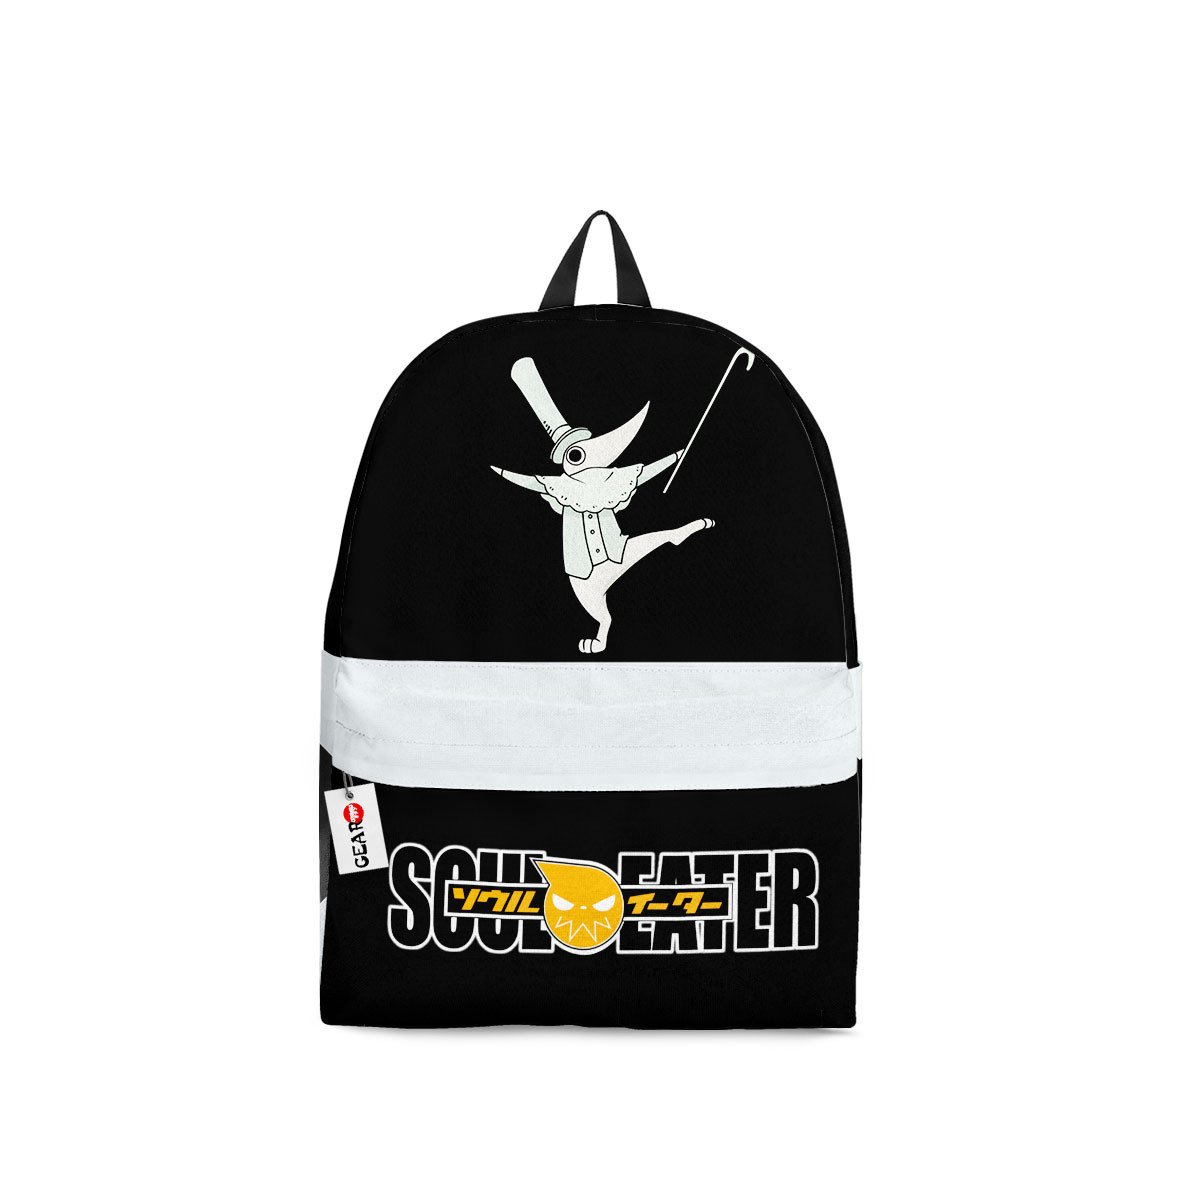 BEST Excalibur Soul Eater Anime Printed 3D Leisure Backpack